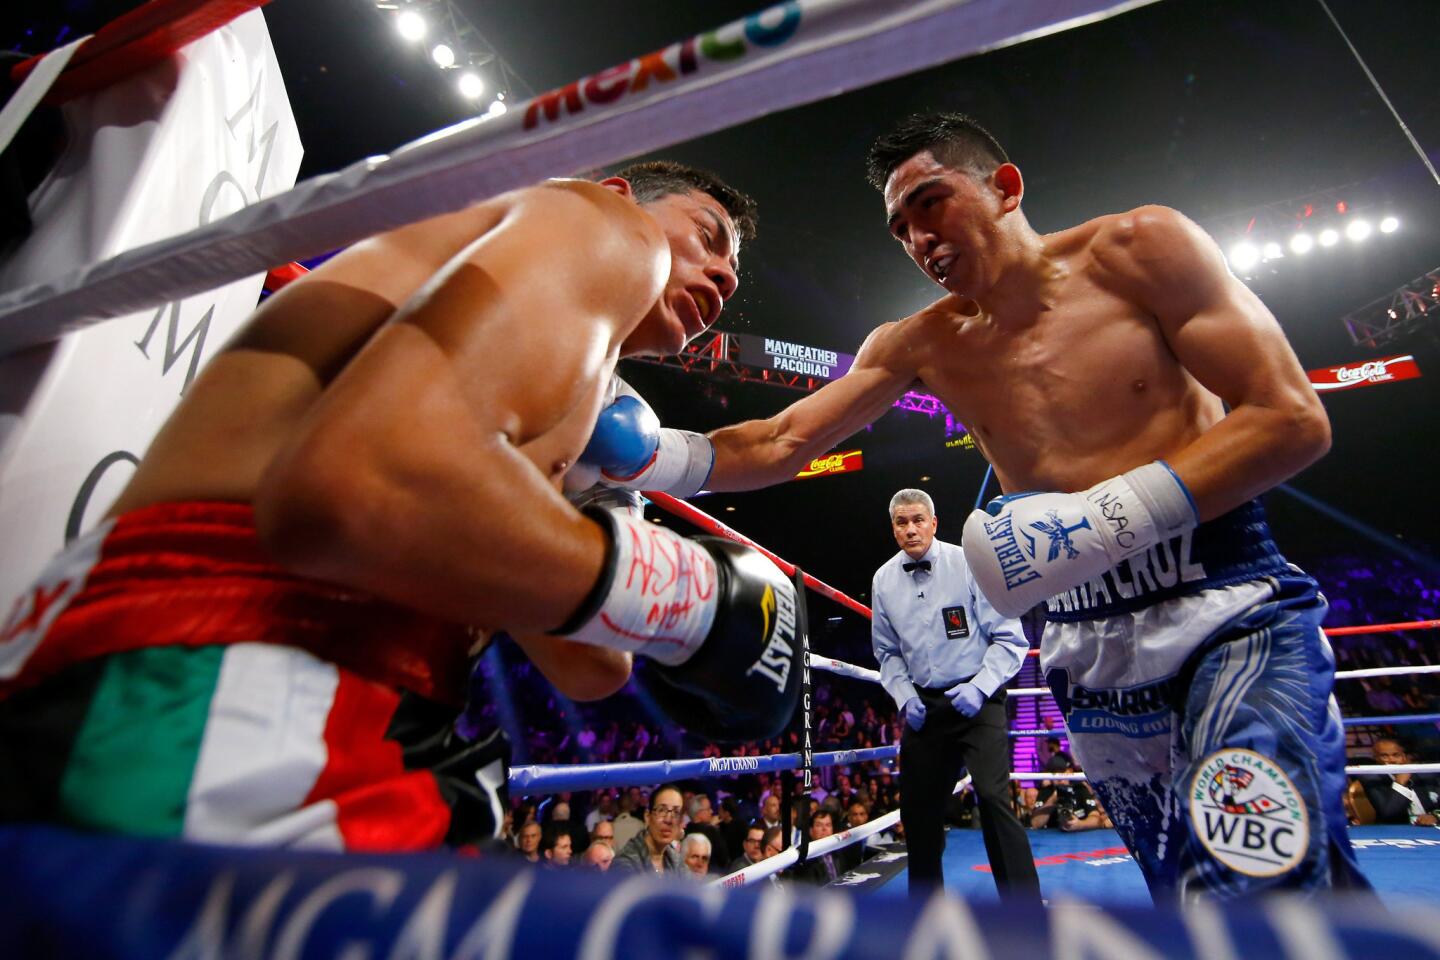 Leo Santa Cruz, right, defeated Jose Cayetano by unanimous decision in a 10-round featherweight fight in Las Vegas in May.